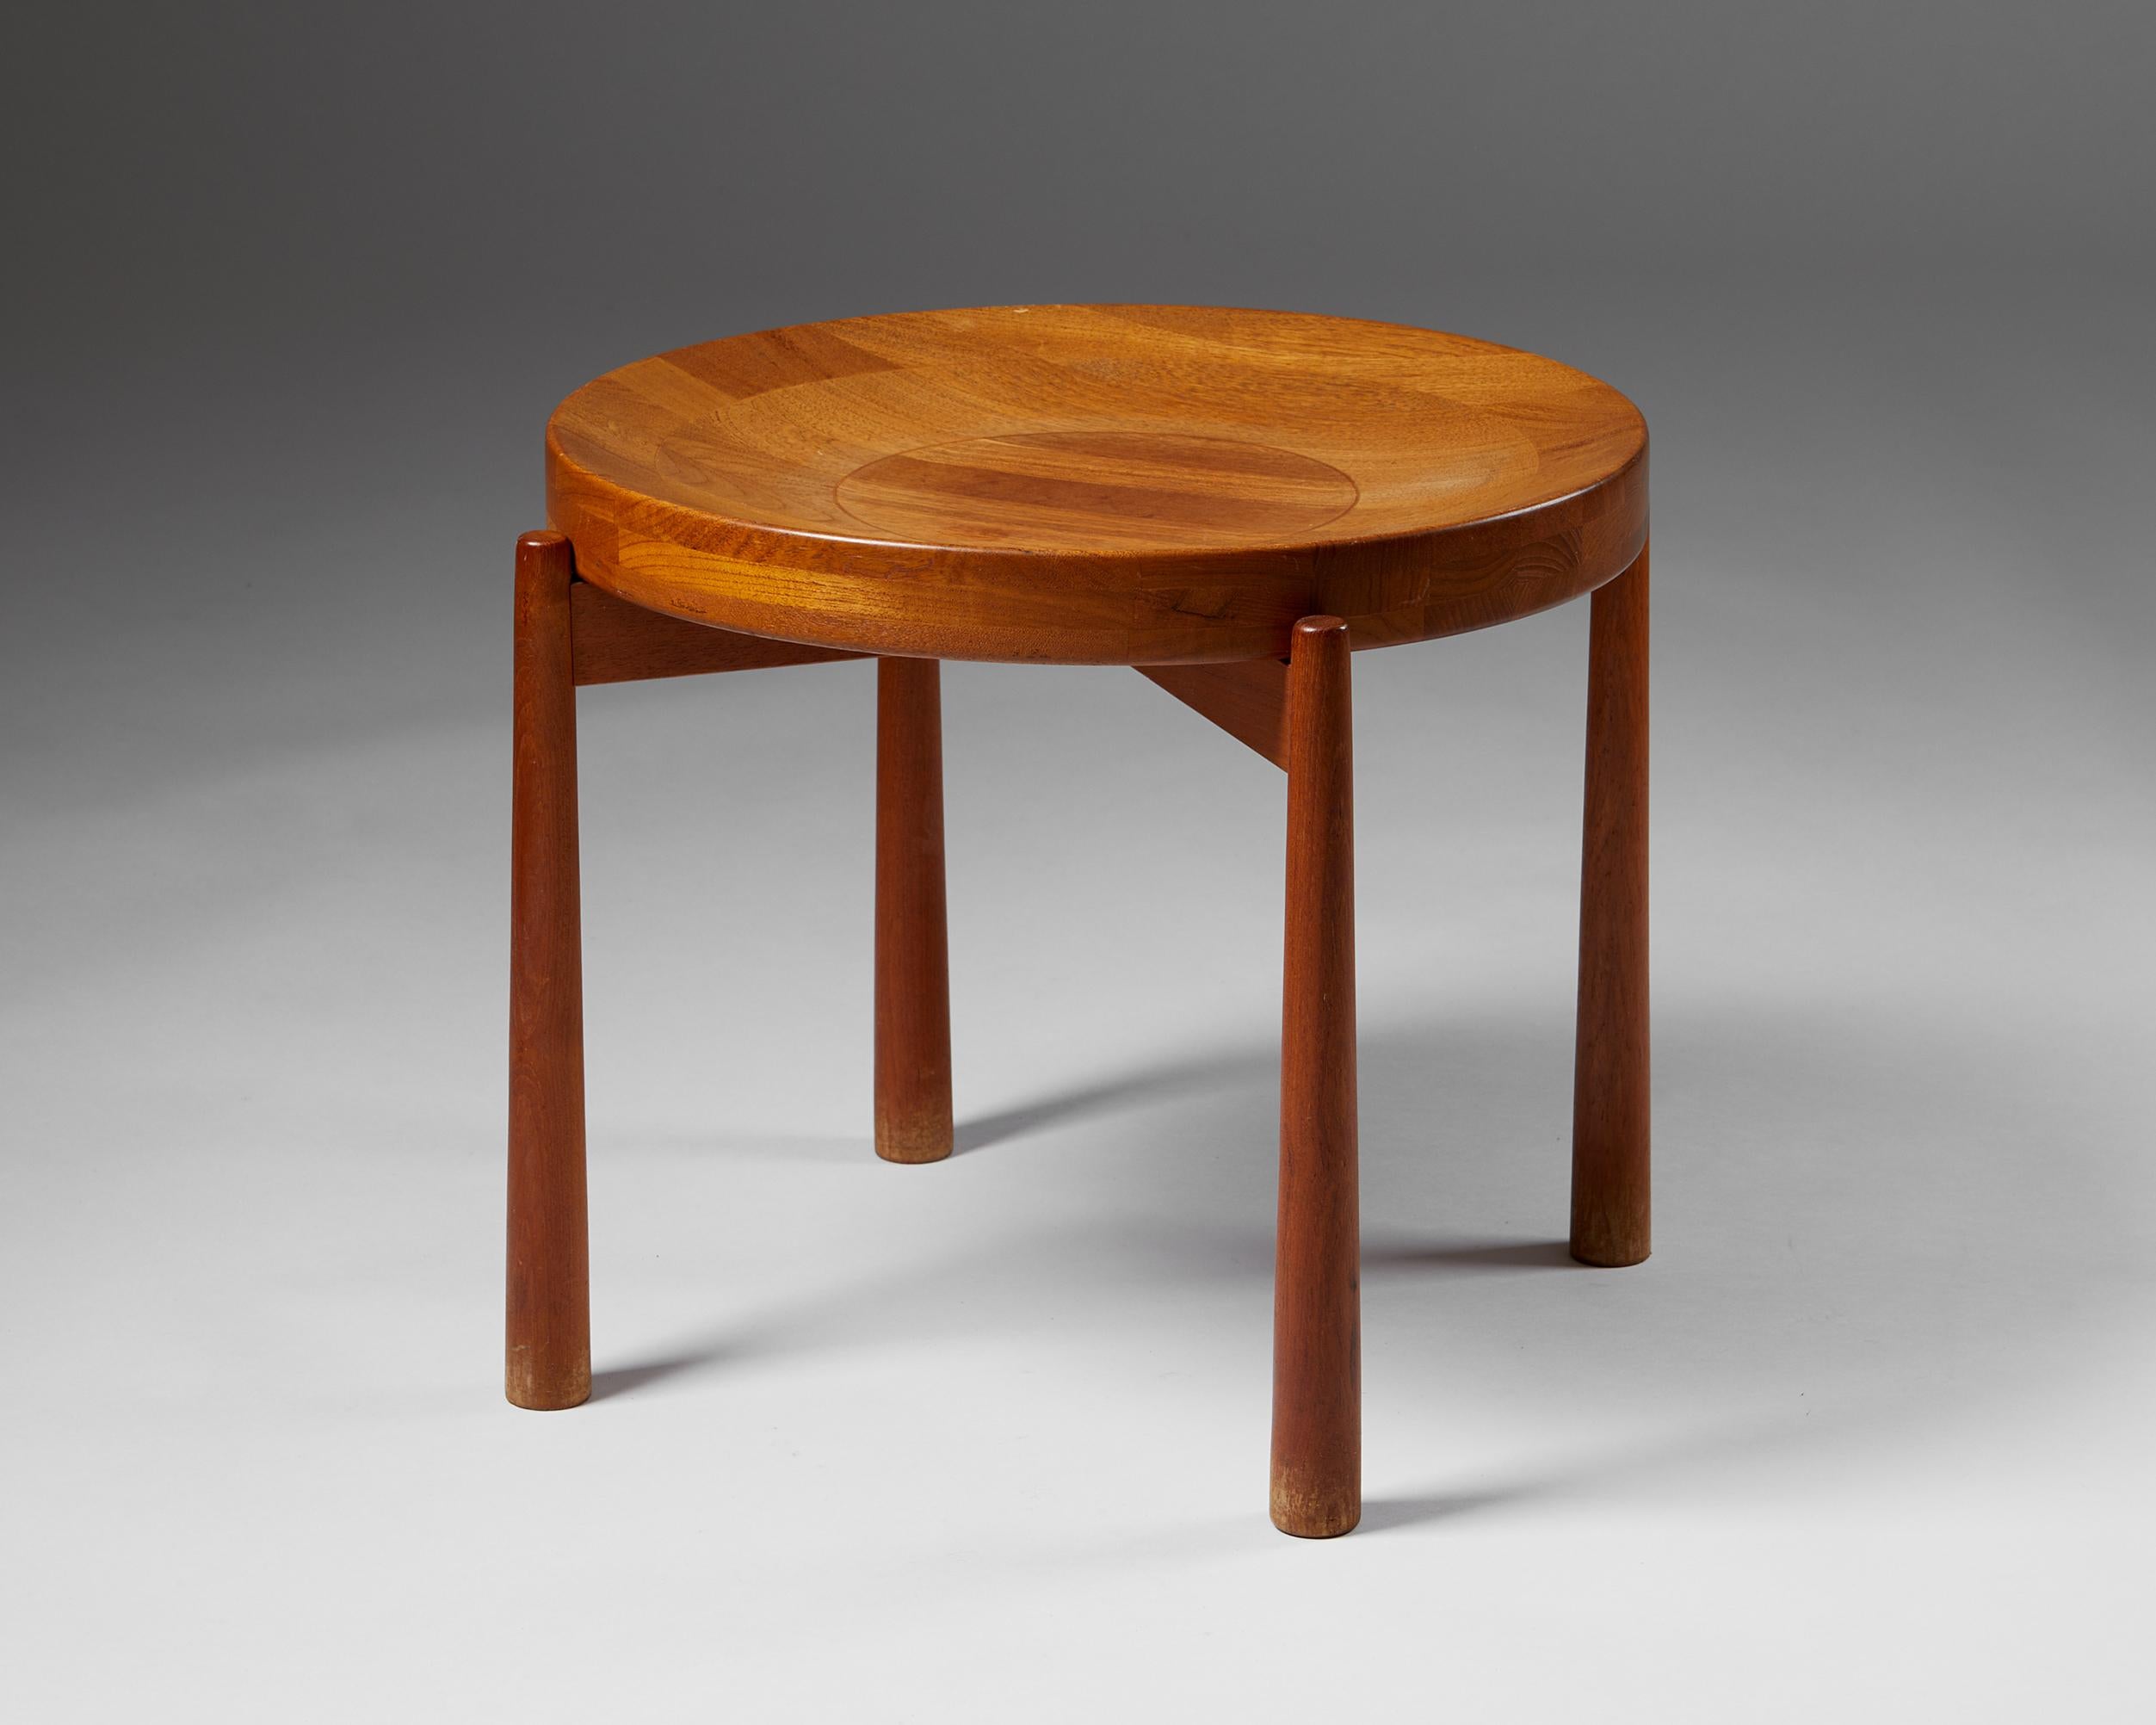 Side table designed by Jens Harald Quistgaard,
Denmark, 1950s.

Teak.

Exquisite woodwork and a beautifully shaped, removable tray surface that can function as a bowl characterise this Danish collectable. The sculptor Jens Harald Quistgaard worked